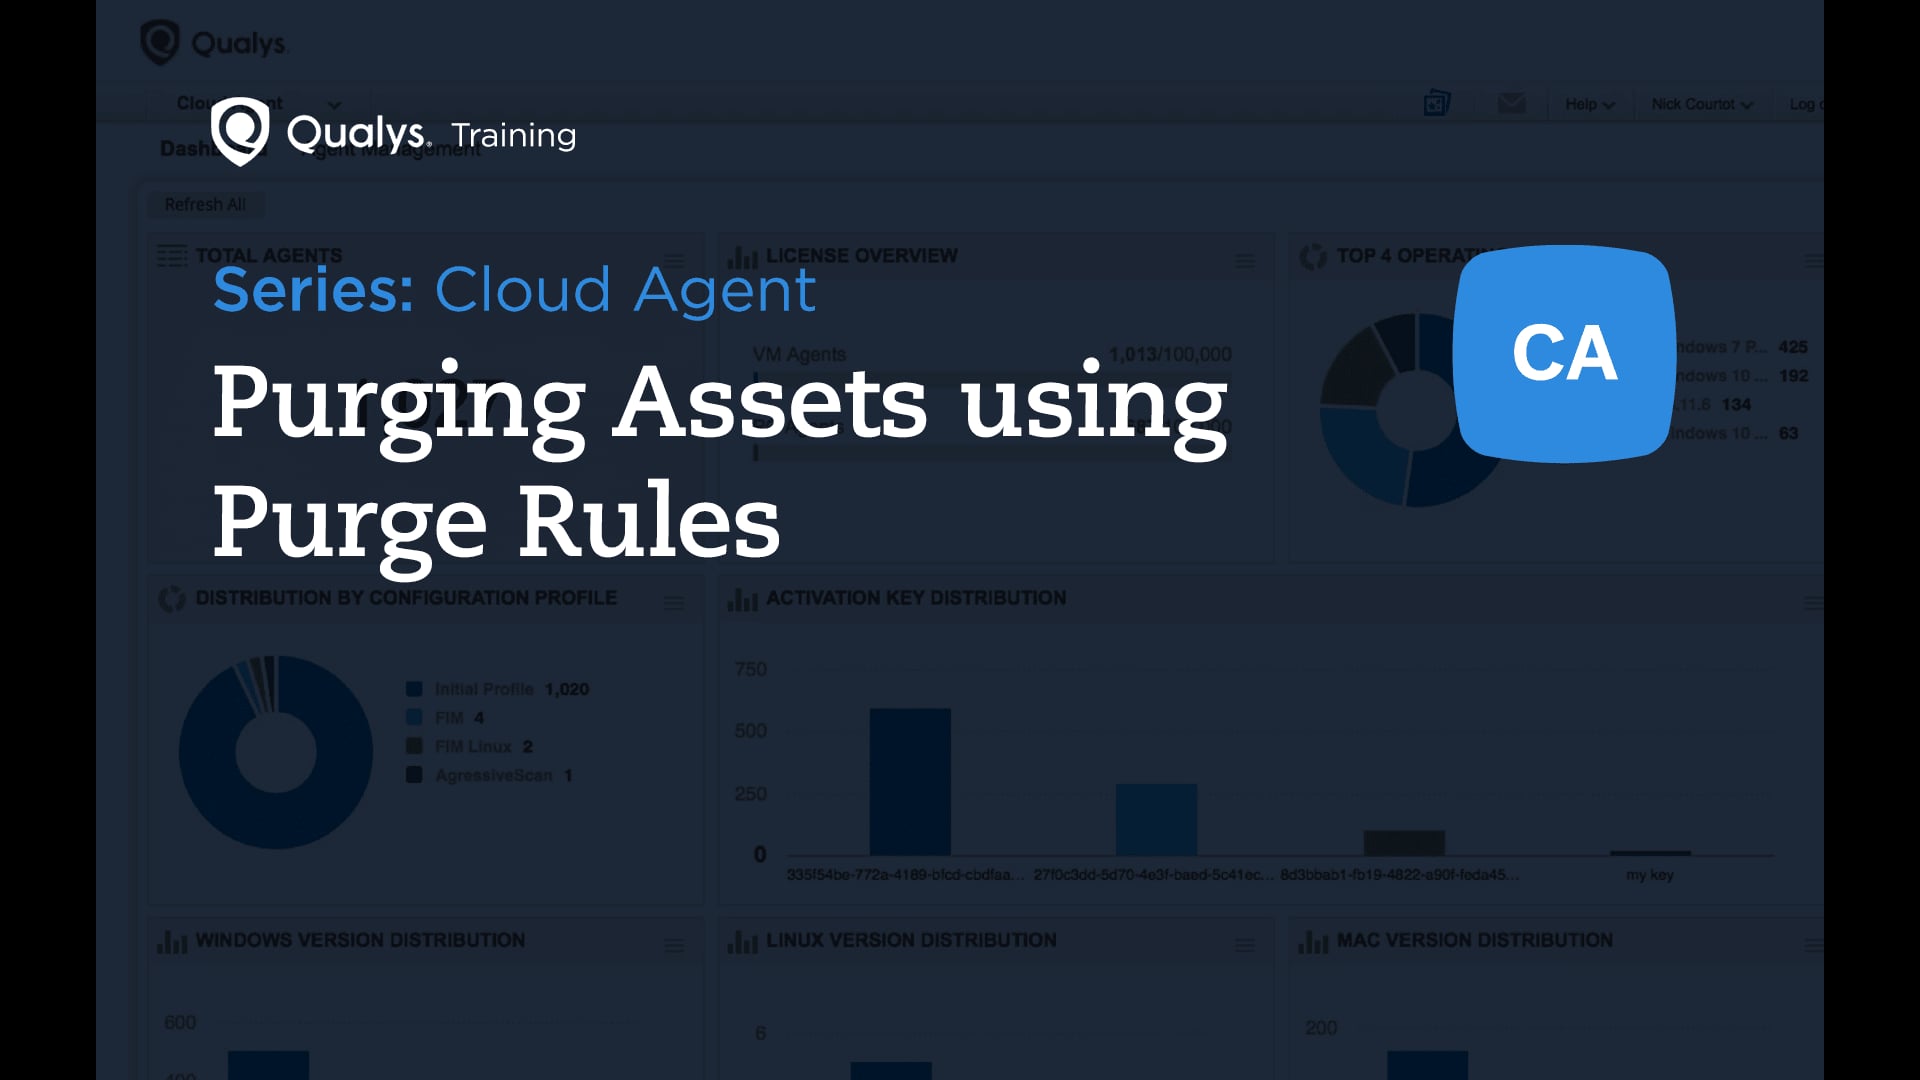 Purging Assets using Purge Rules